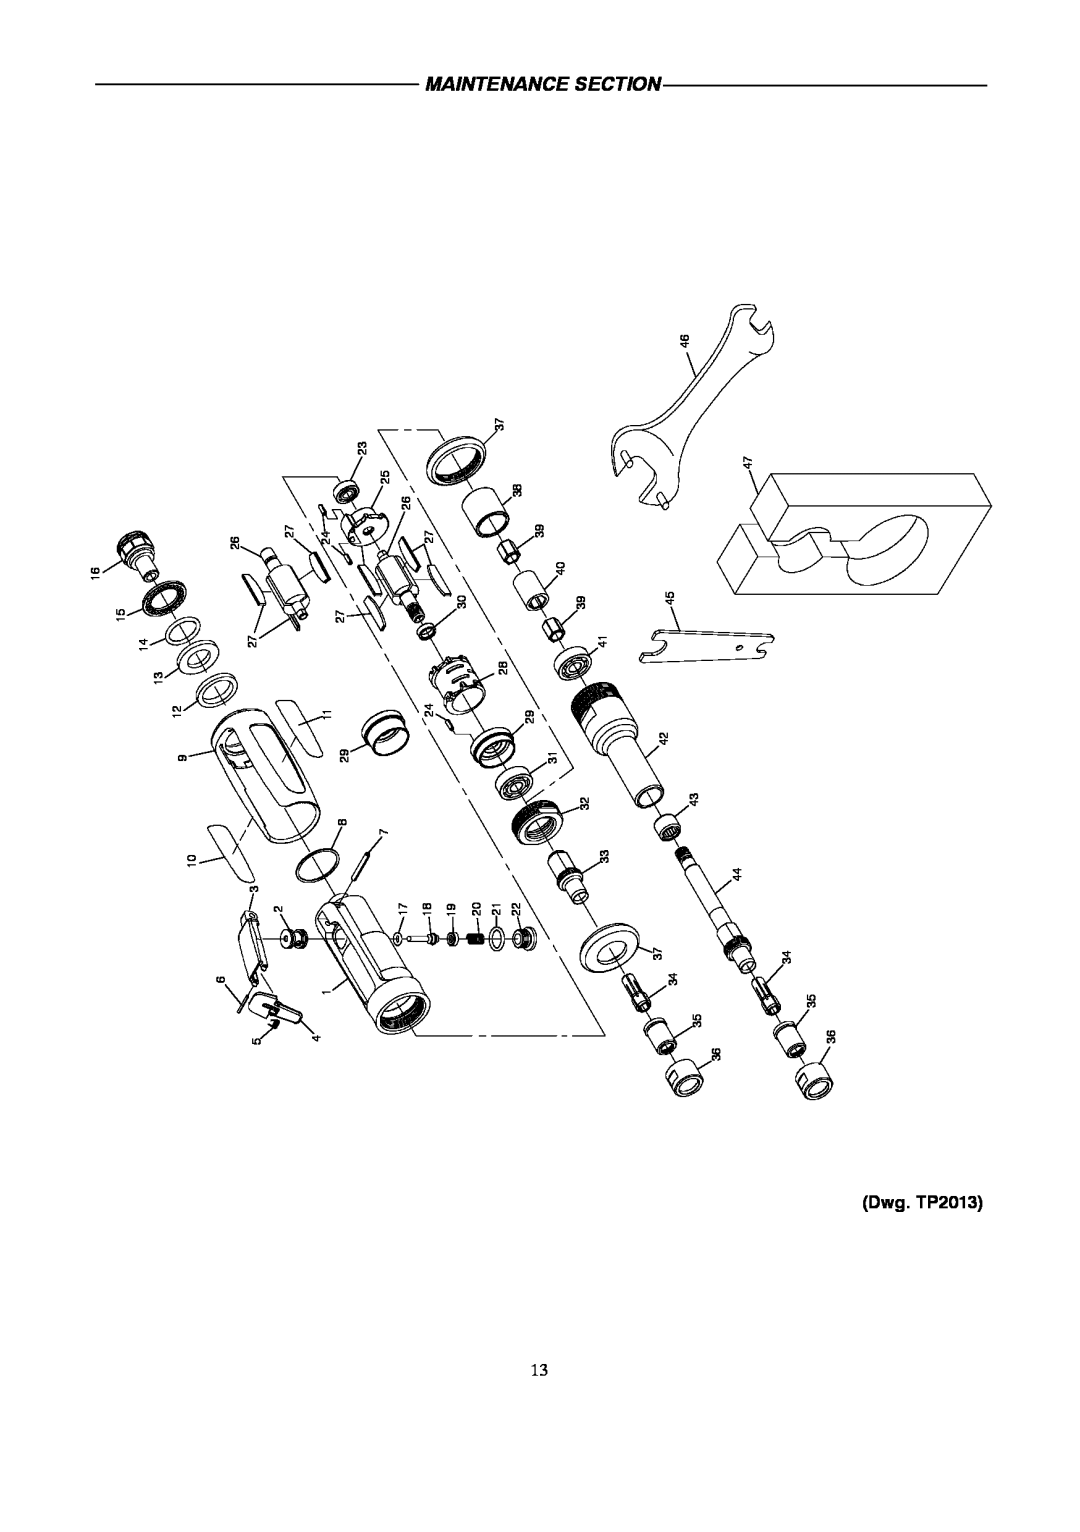 Ingersoll-Rand 4578217 manual Maintenance Section, Dwg. TP2013 